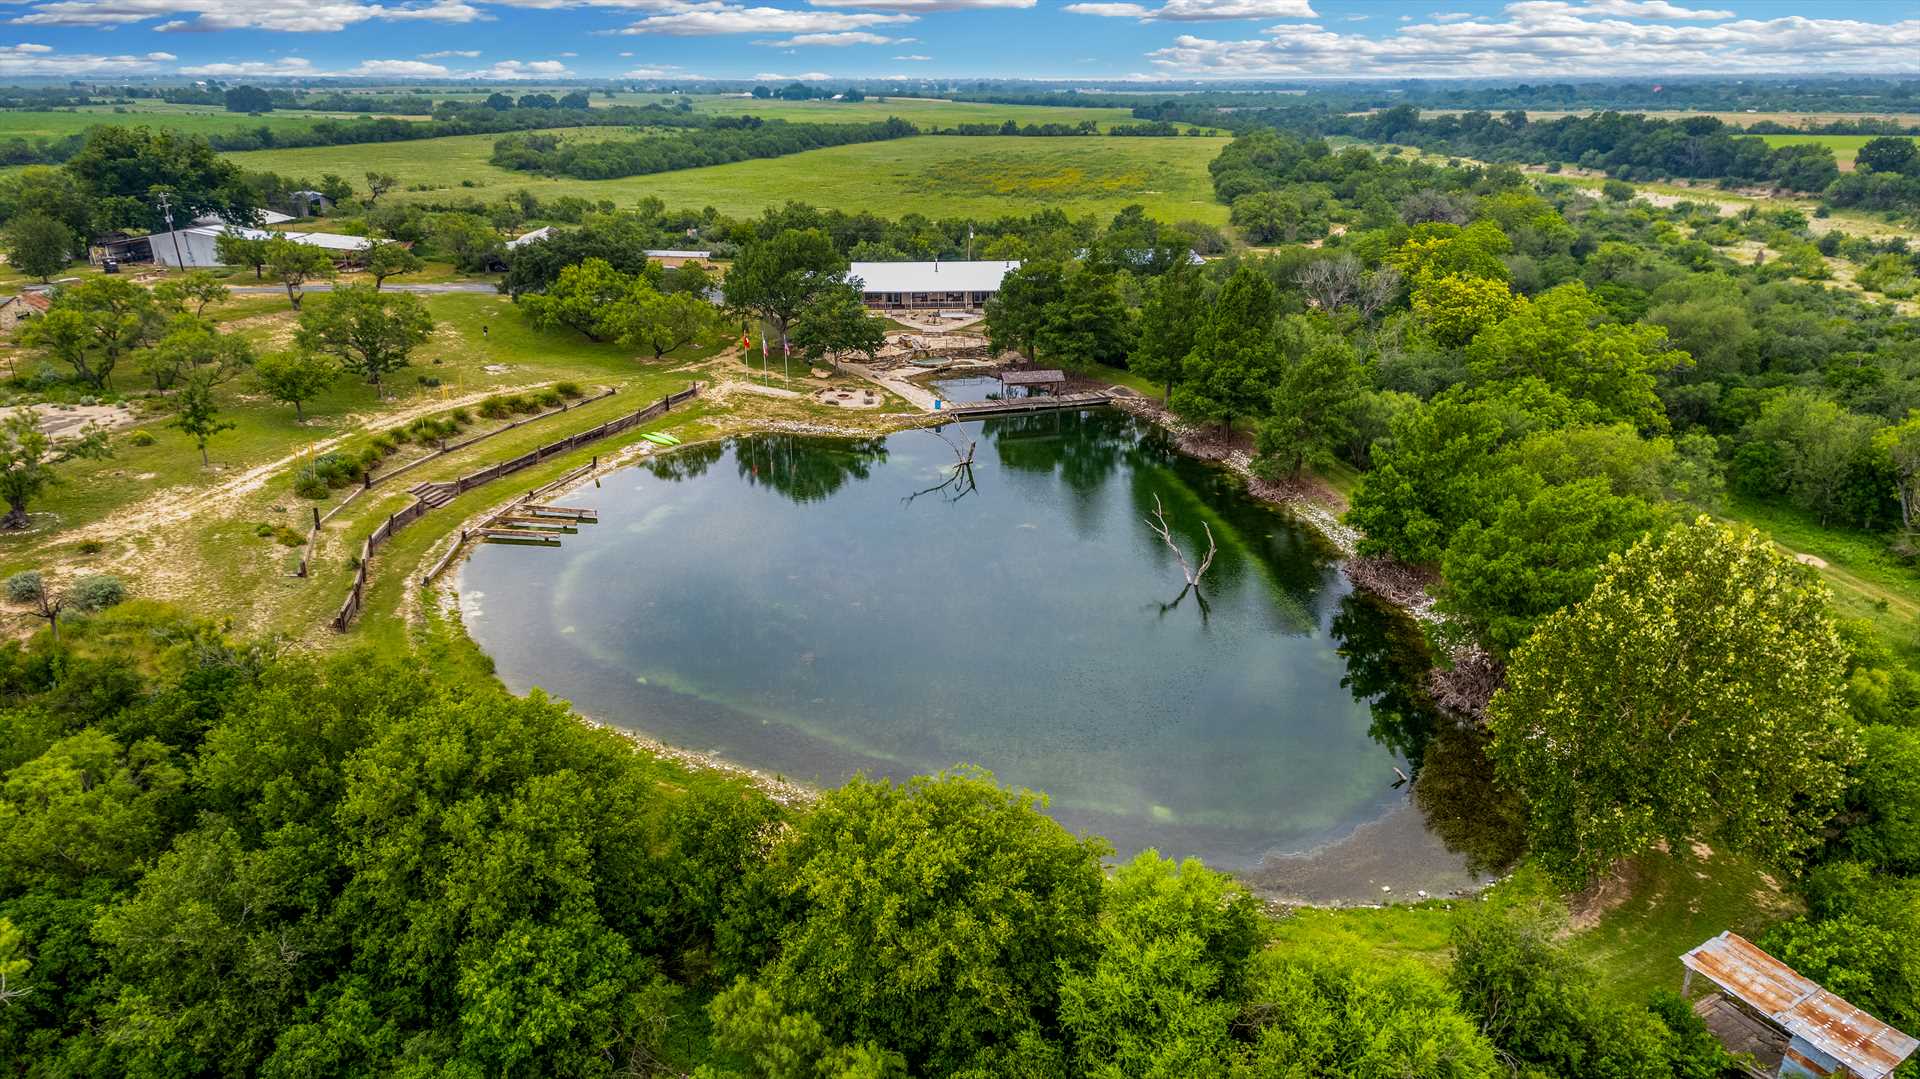                                                 The Lantana Lodge pond is perfect for swimming, and it's also stocked with bass and perch for catch-and-release fishing!